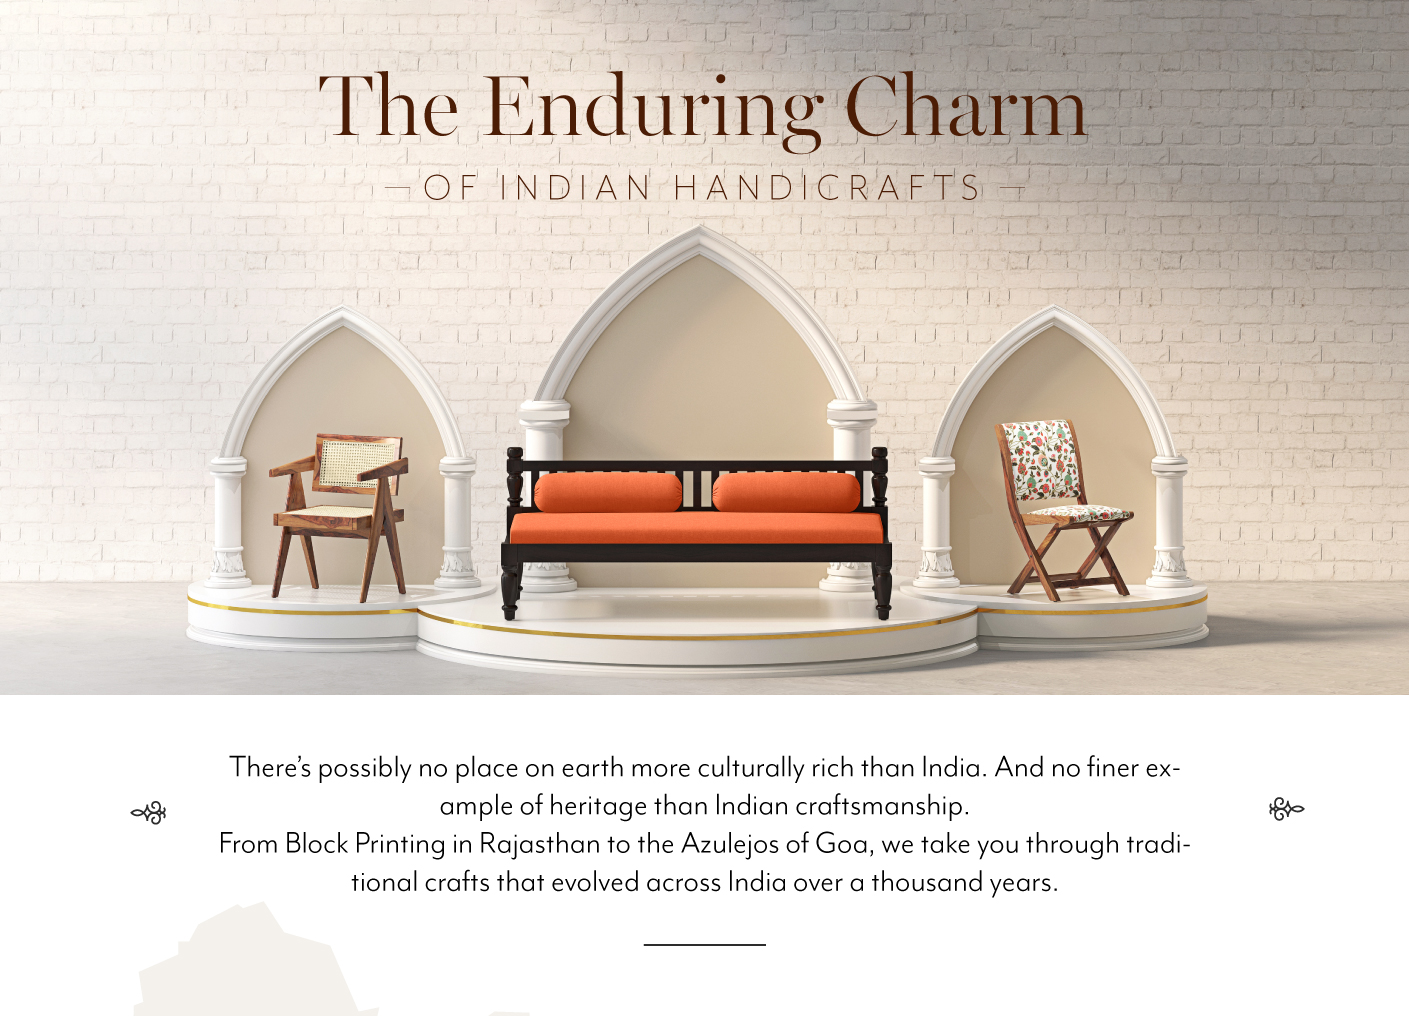 The Enduring Charm of Indian Handicrafts